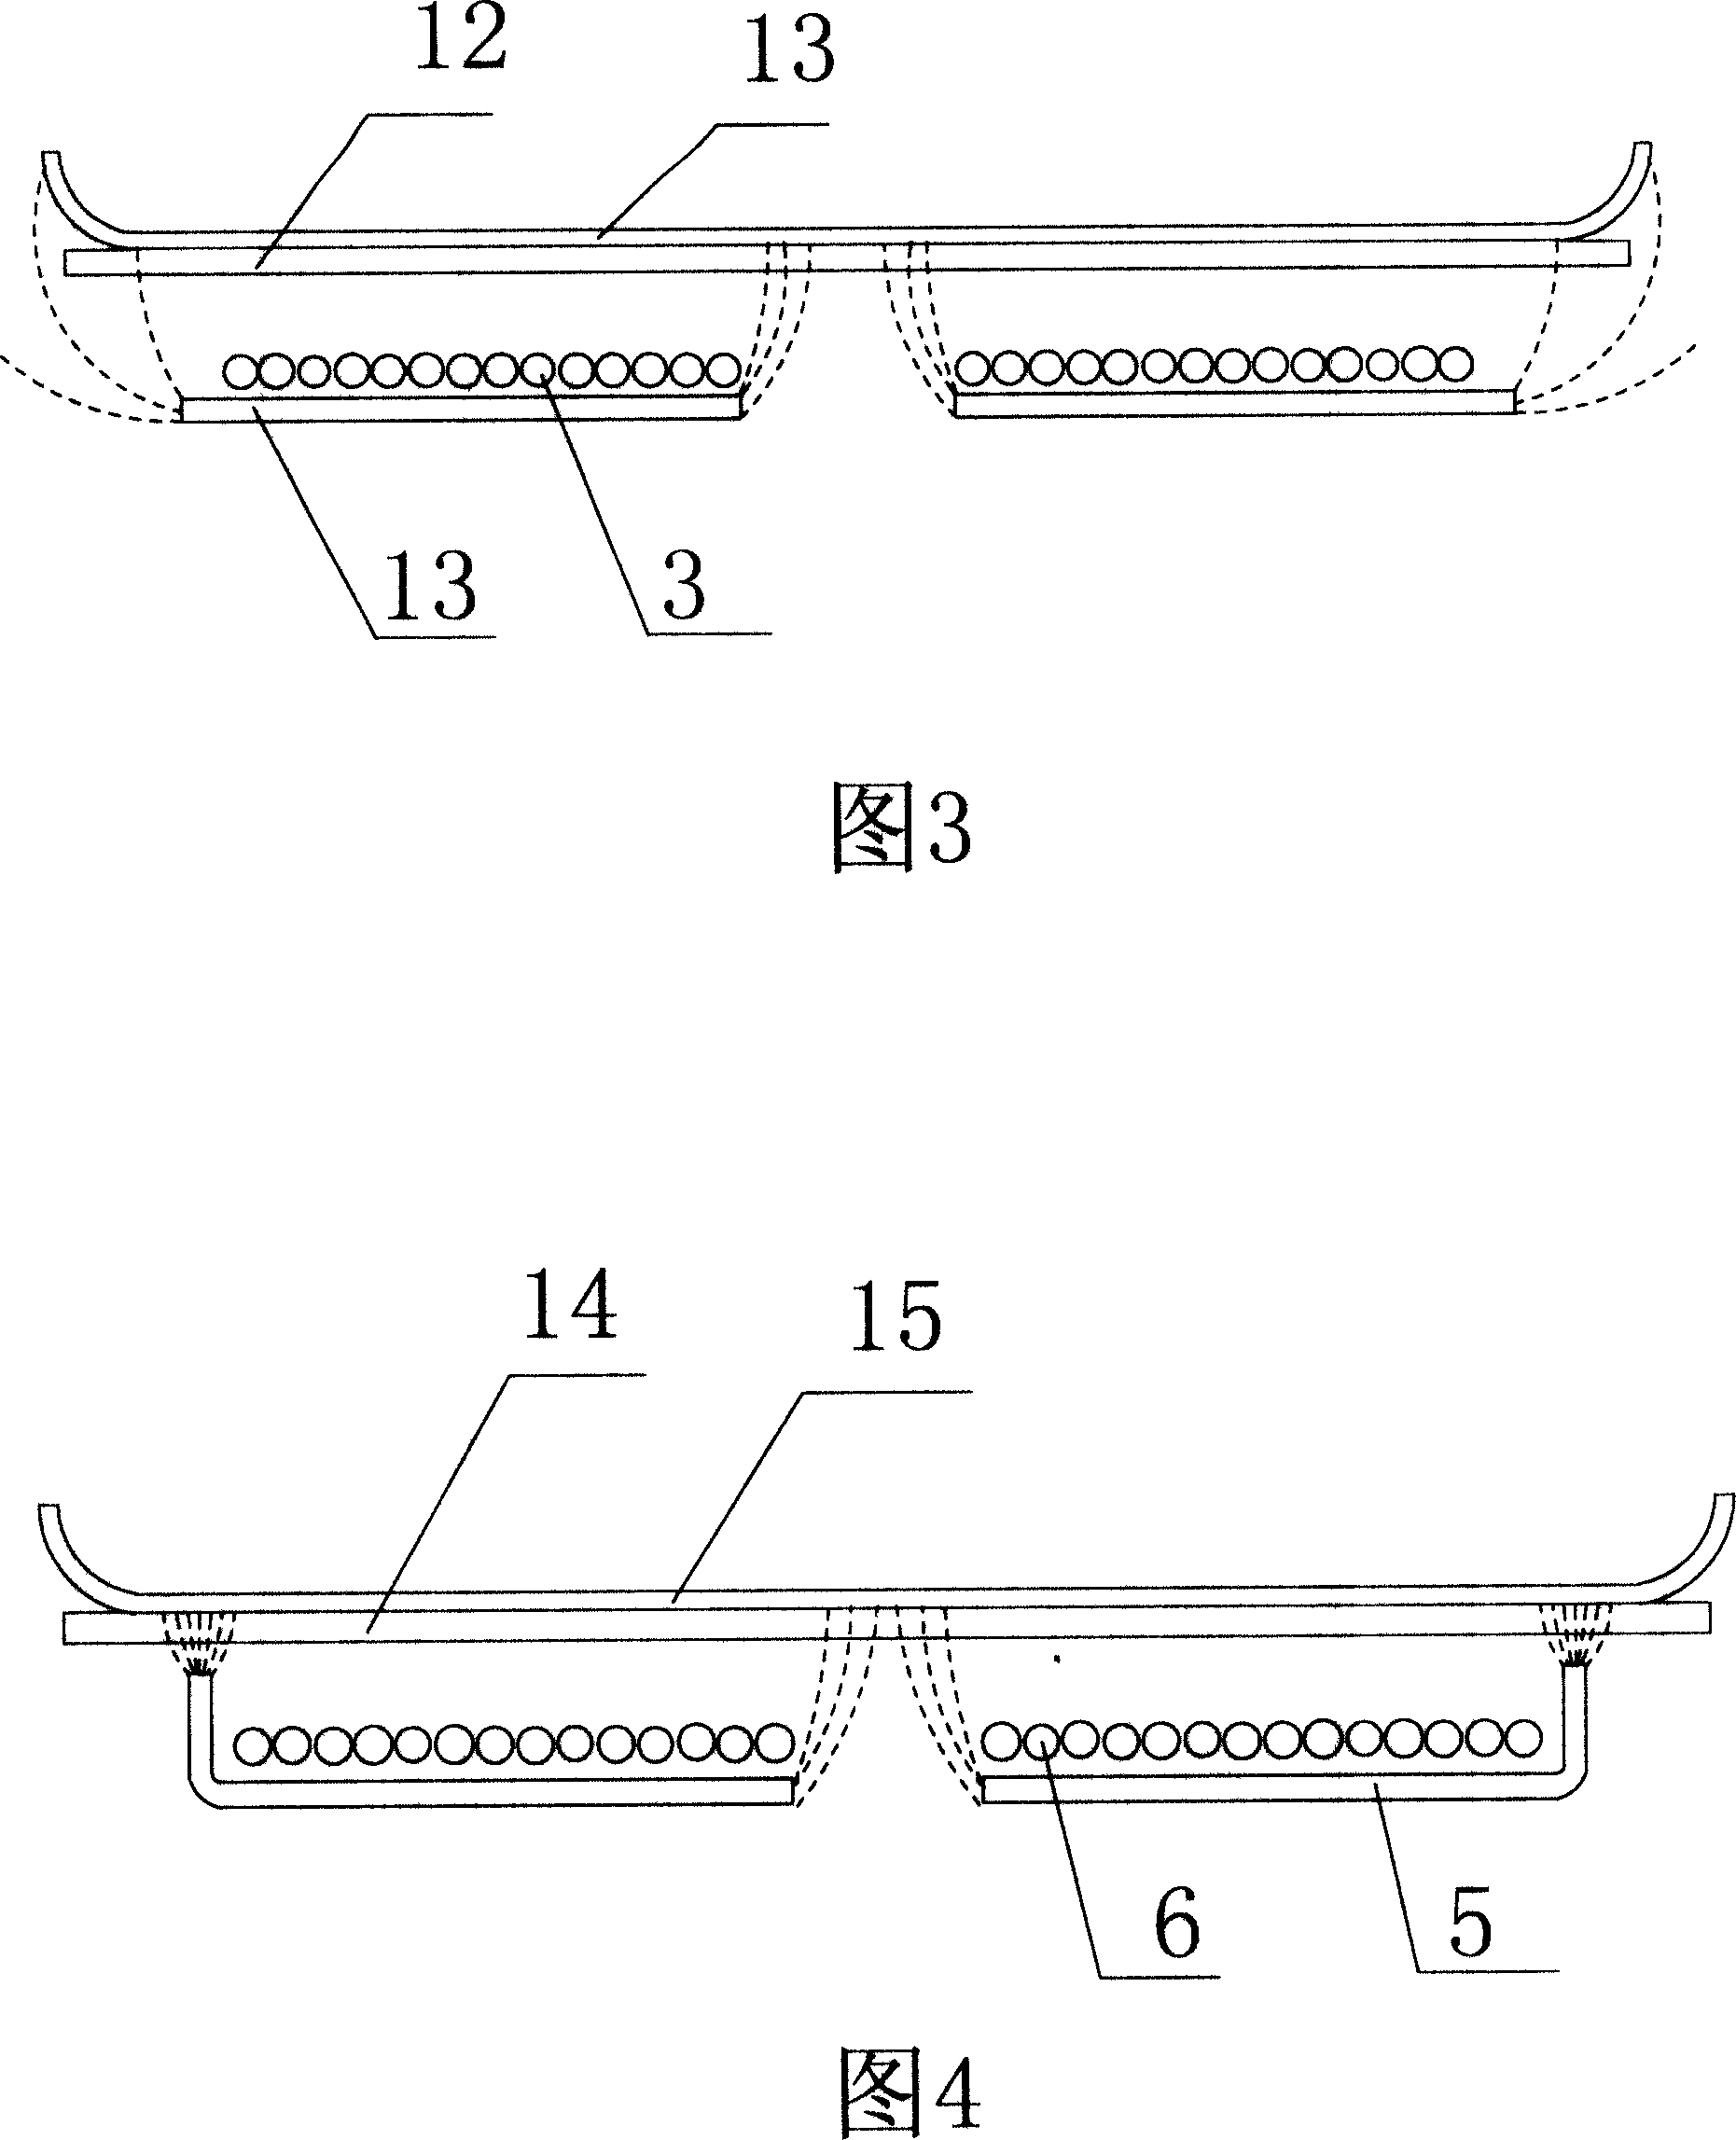 A winding tray for the electromagnetic heating device